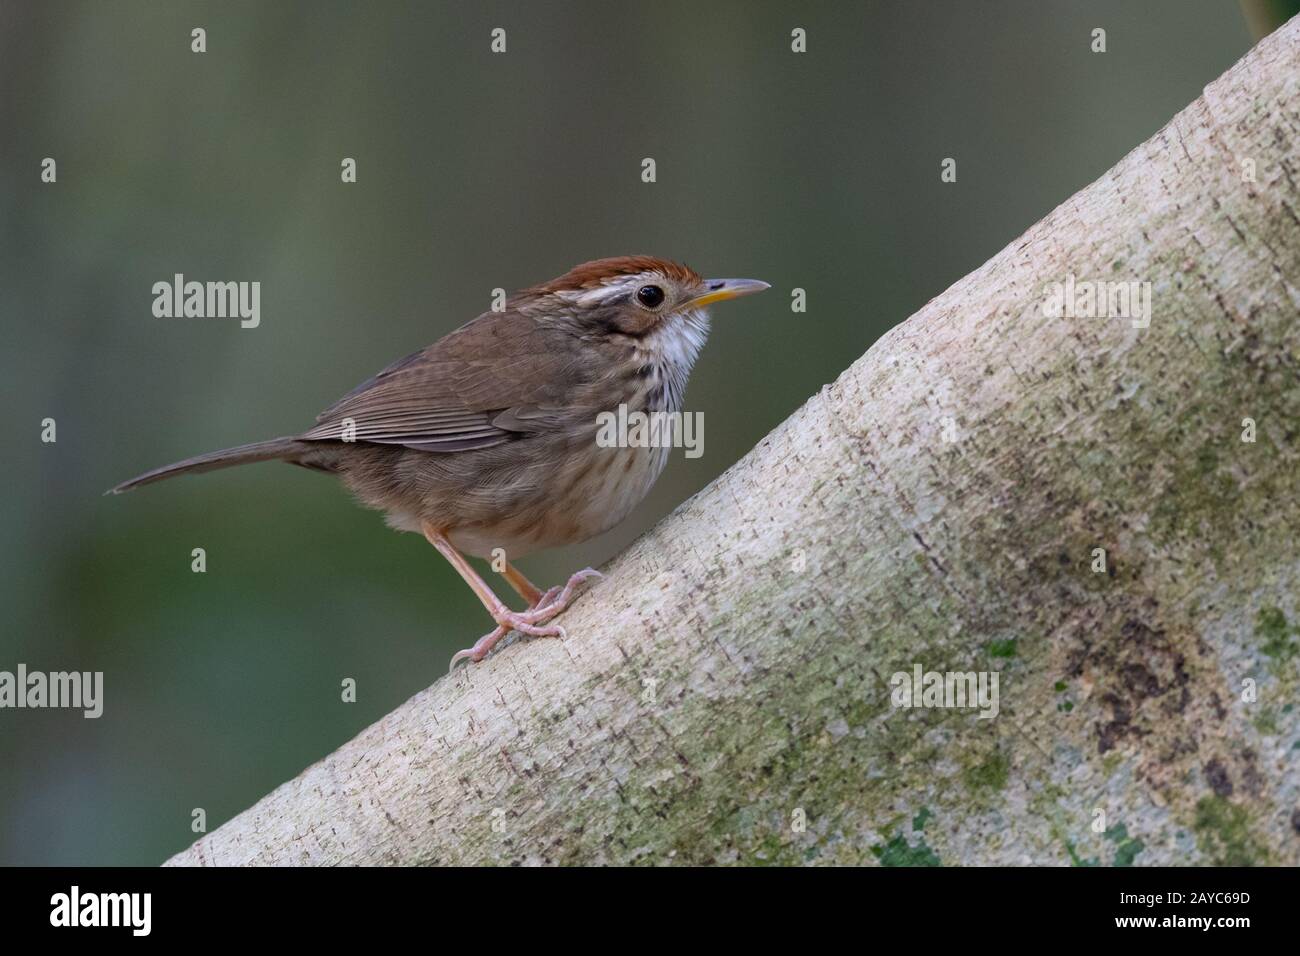 The puff-throated babbler or spotted babbler (Pellorneum ruficeps) is a species of passerine bird found in Asia. Stock Photo